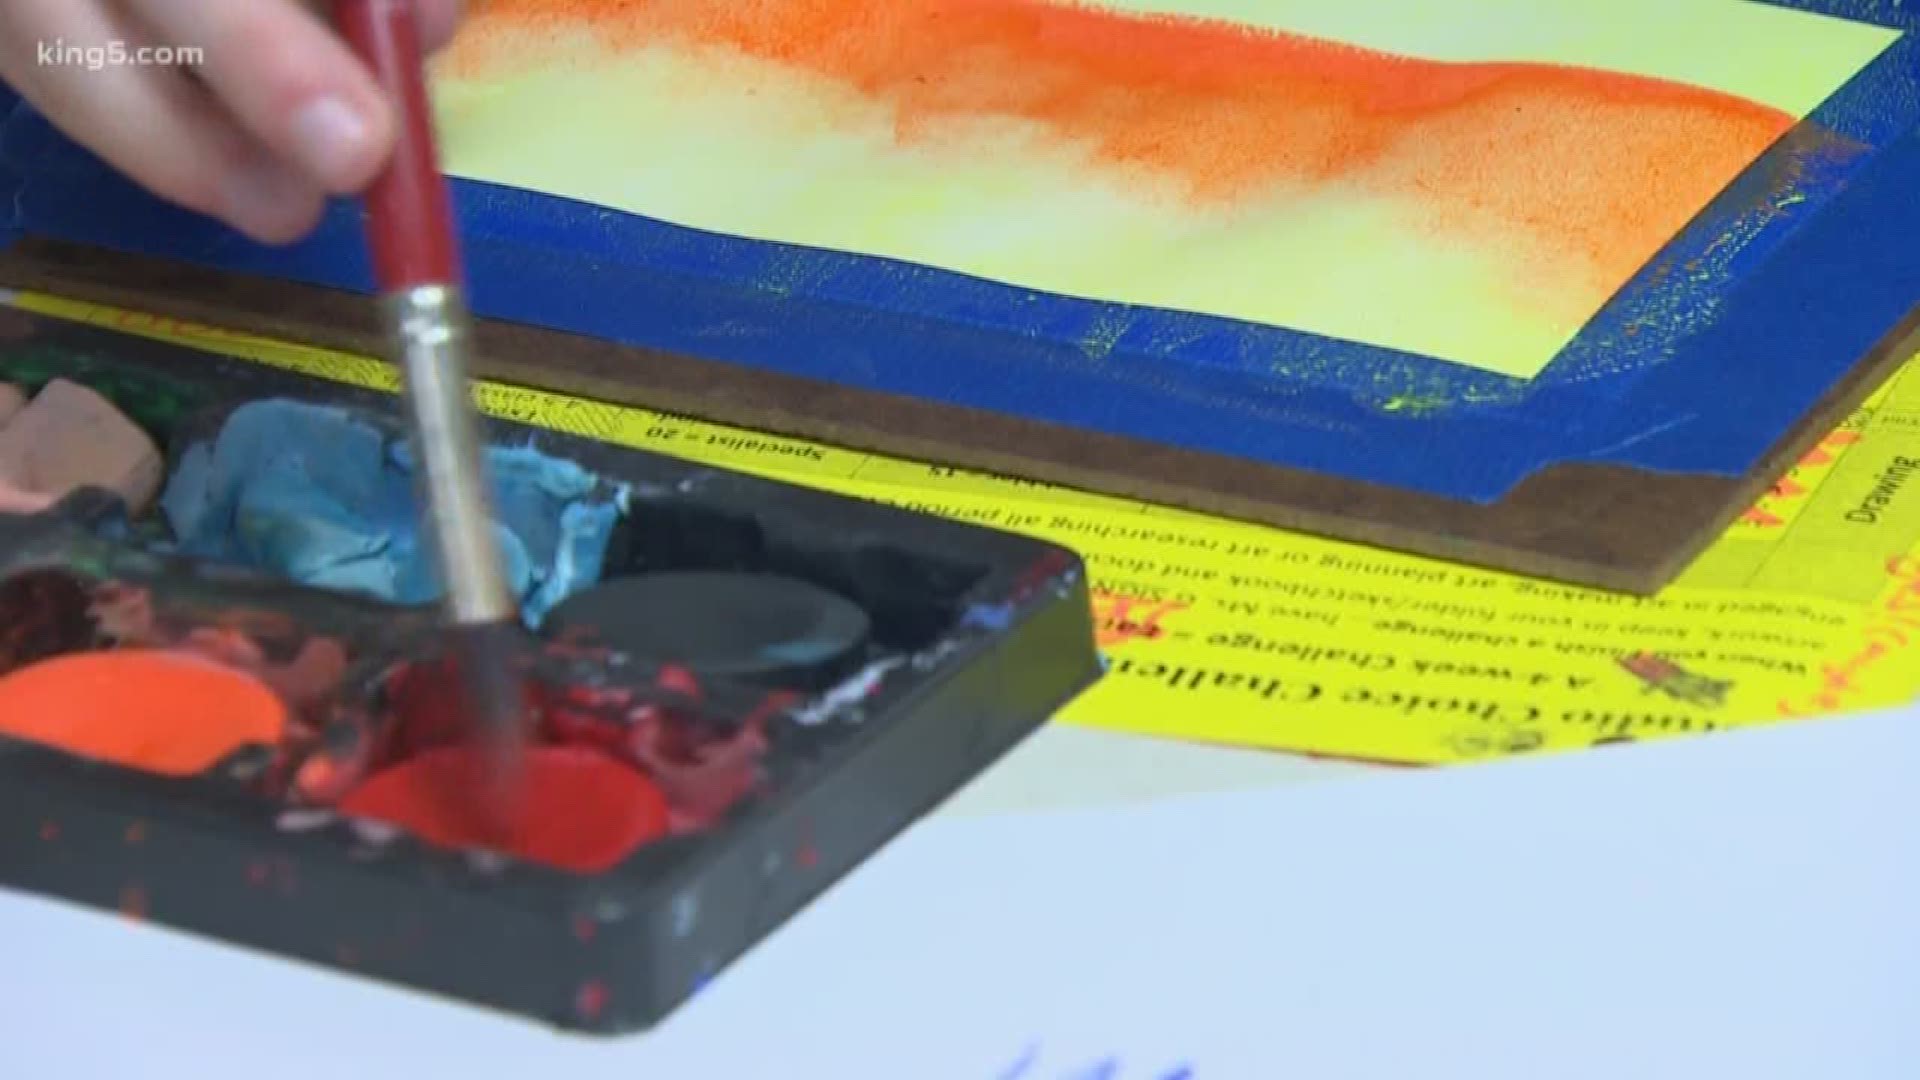 Making school fun and getting kids to think creatively are two of the toughest tasks for any teacher. But one Everett art teacher is excelling at both. She is receiving an award for work in the classroom that is helping kids long after they leave it. KING 5's Eric Wilkinson reports.